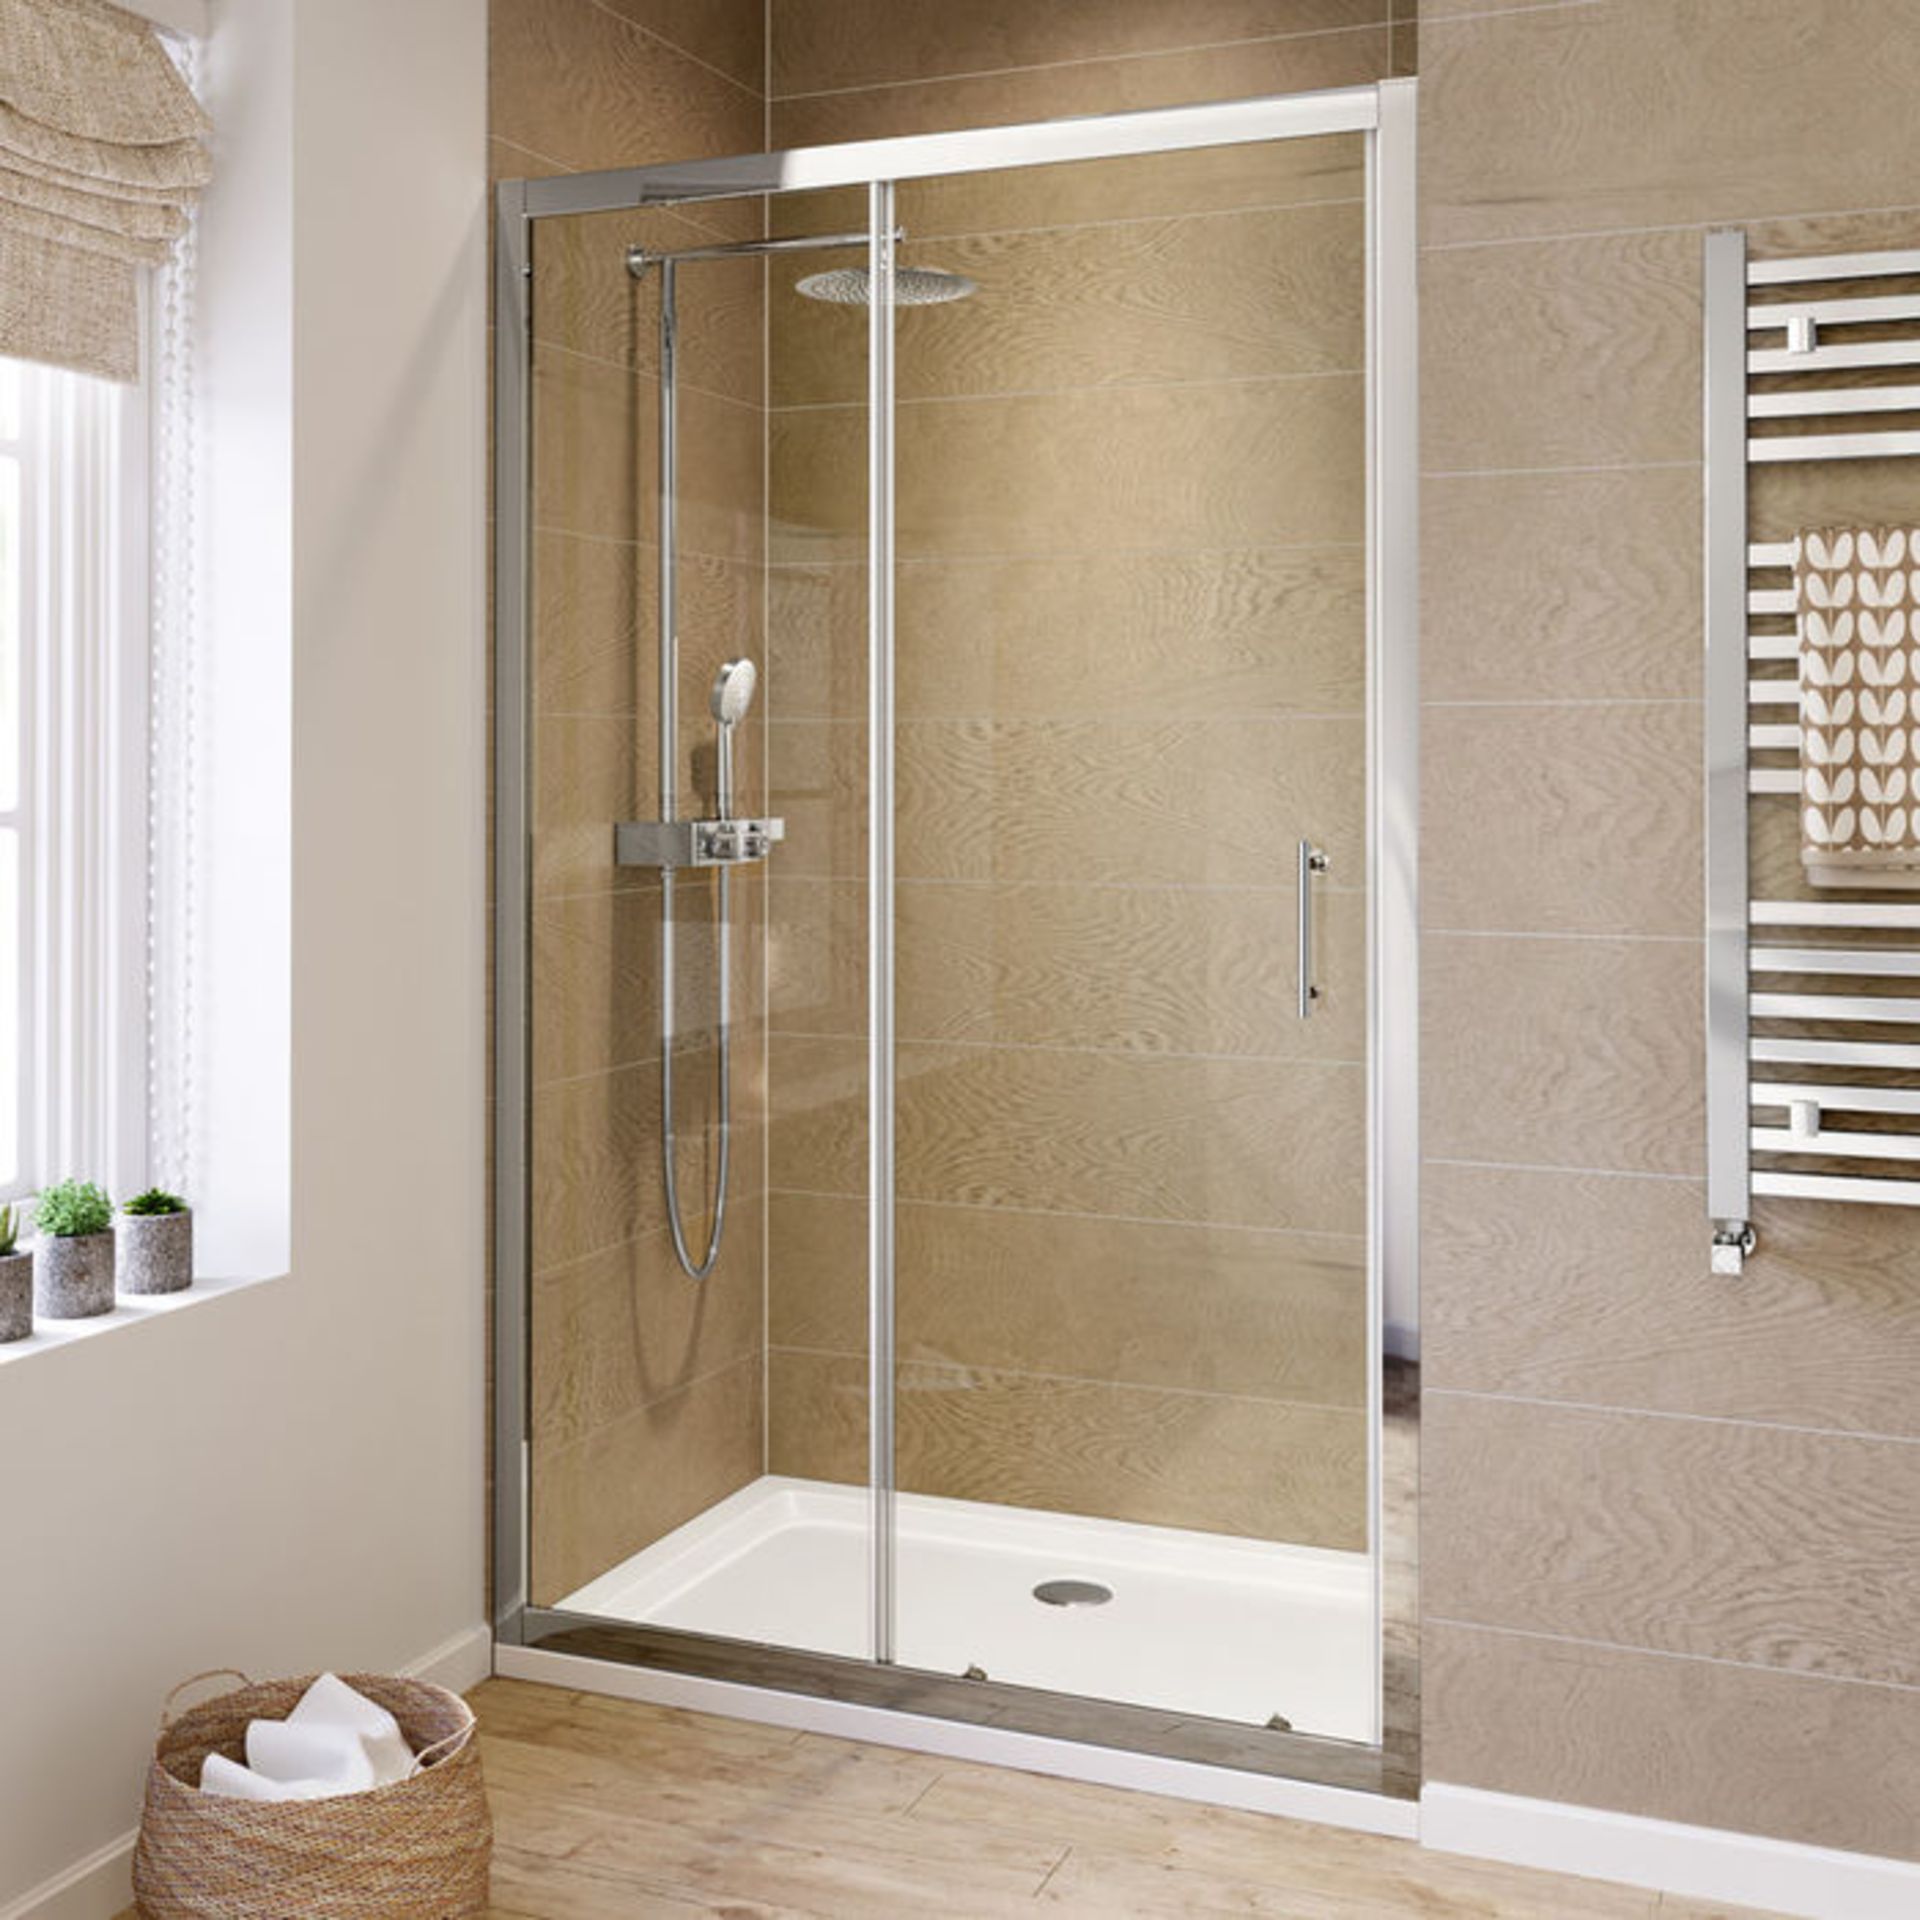 (AA20) 1000mm - 6mm - Elements Sliding Shower Door. RRP £299.99. 6mm Safety Glass Fully waterproof - Image 2 of 2